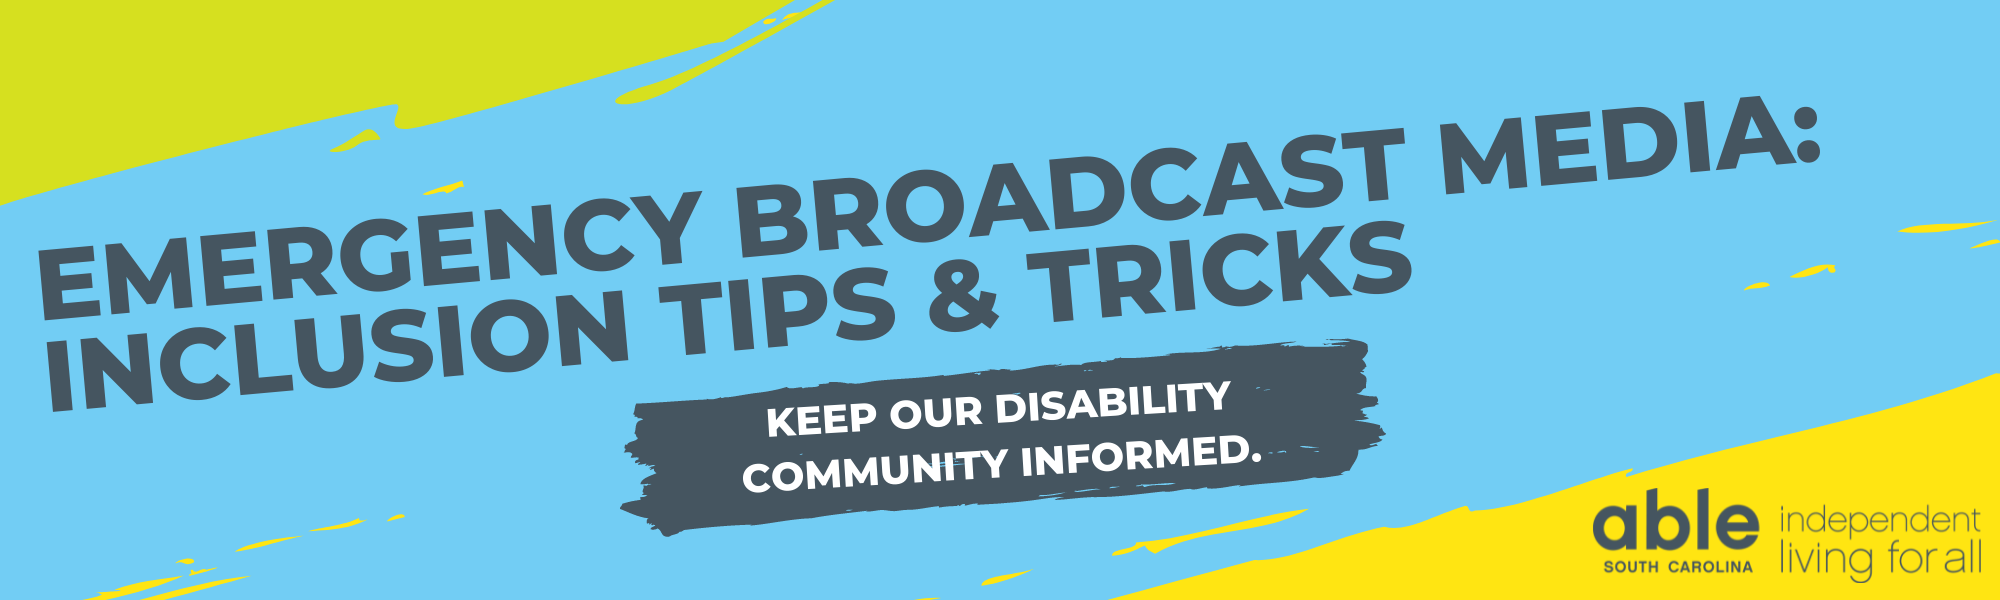 Graphic with light blue background. Top left and bottom right corners feature graphic illustration of paint swath in light green and yellow. Large dark gray text reads, 'Emergency broadcast media: inclusion tips & tricks' Below that in white text over a gray paint swath reads, 'keep our disability community informed.' Bottom right corner features Able South Carolina logo with slogan, 'independent living for all.'